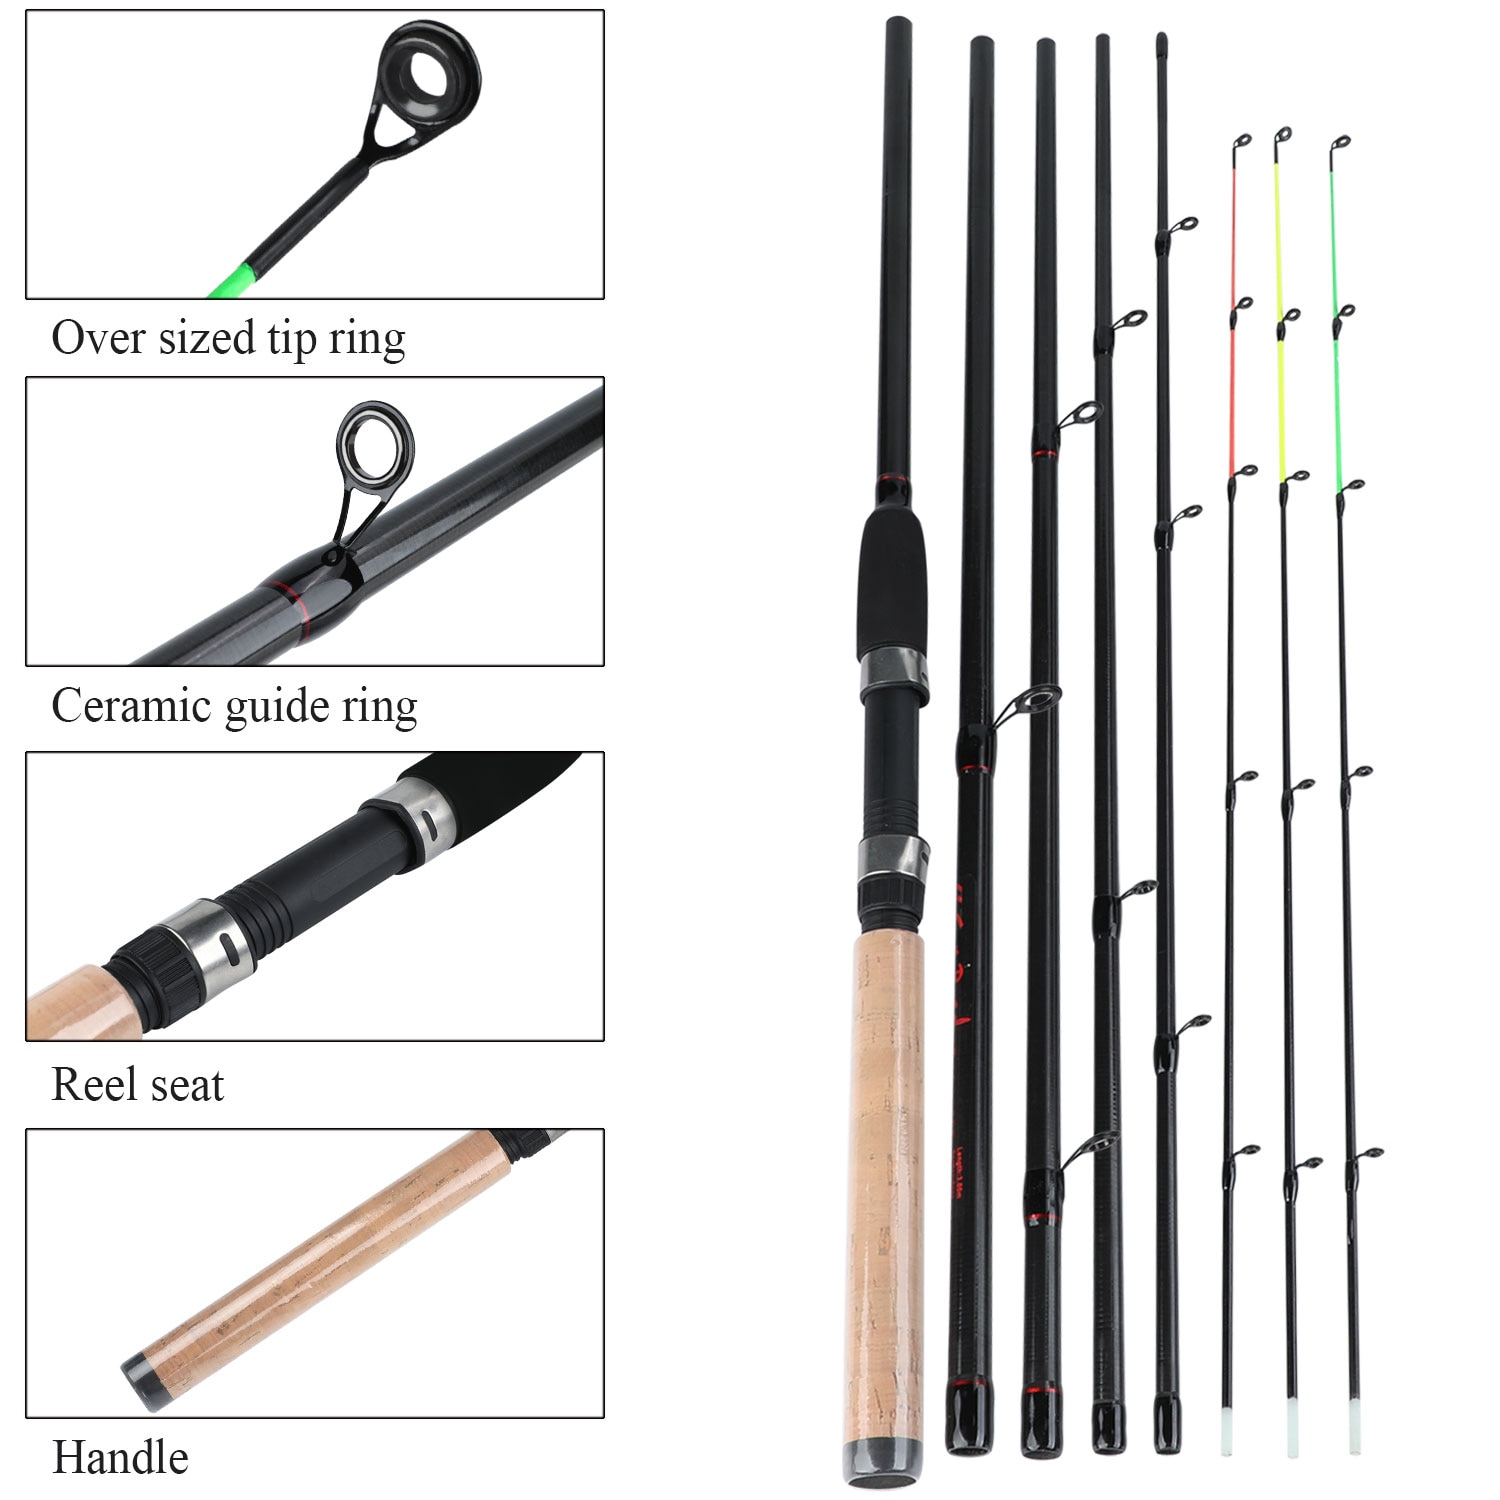 Sougayilang 3.0M Feeder High Carbon Rod Sets with Spinning Reel 3 Sections L M H Power Fishing Rod Combon Feeder Rod Pesca